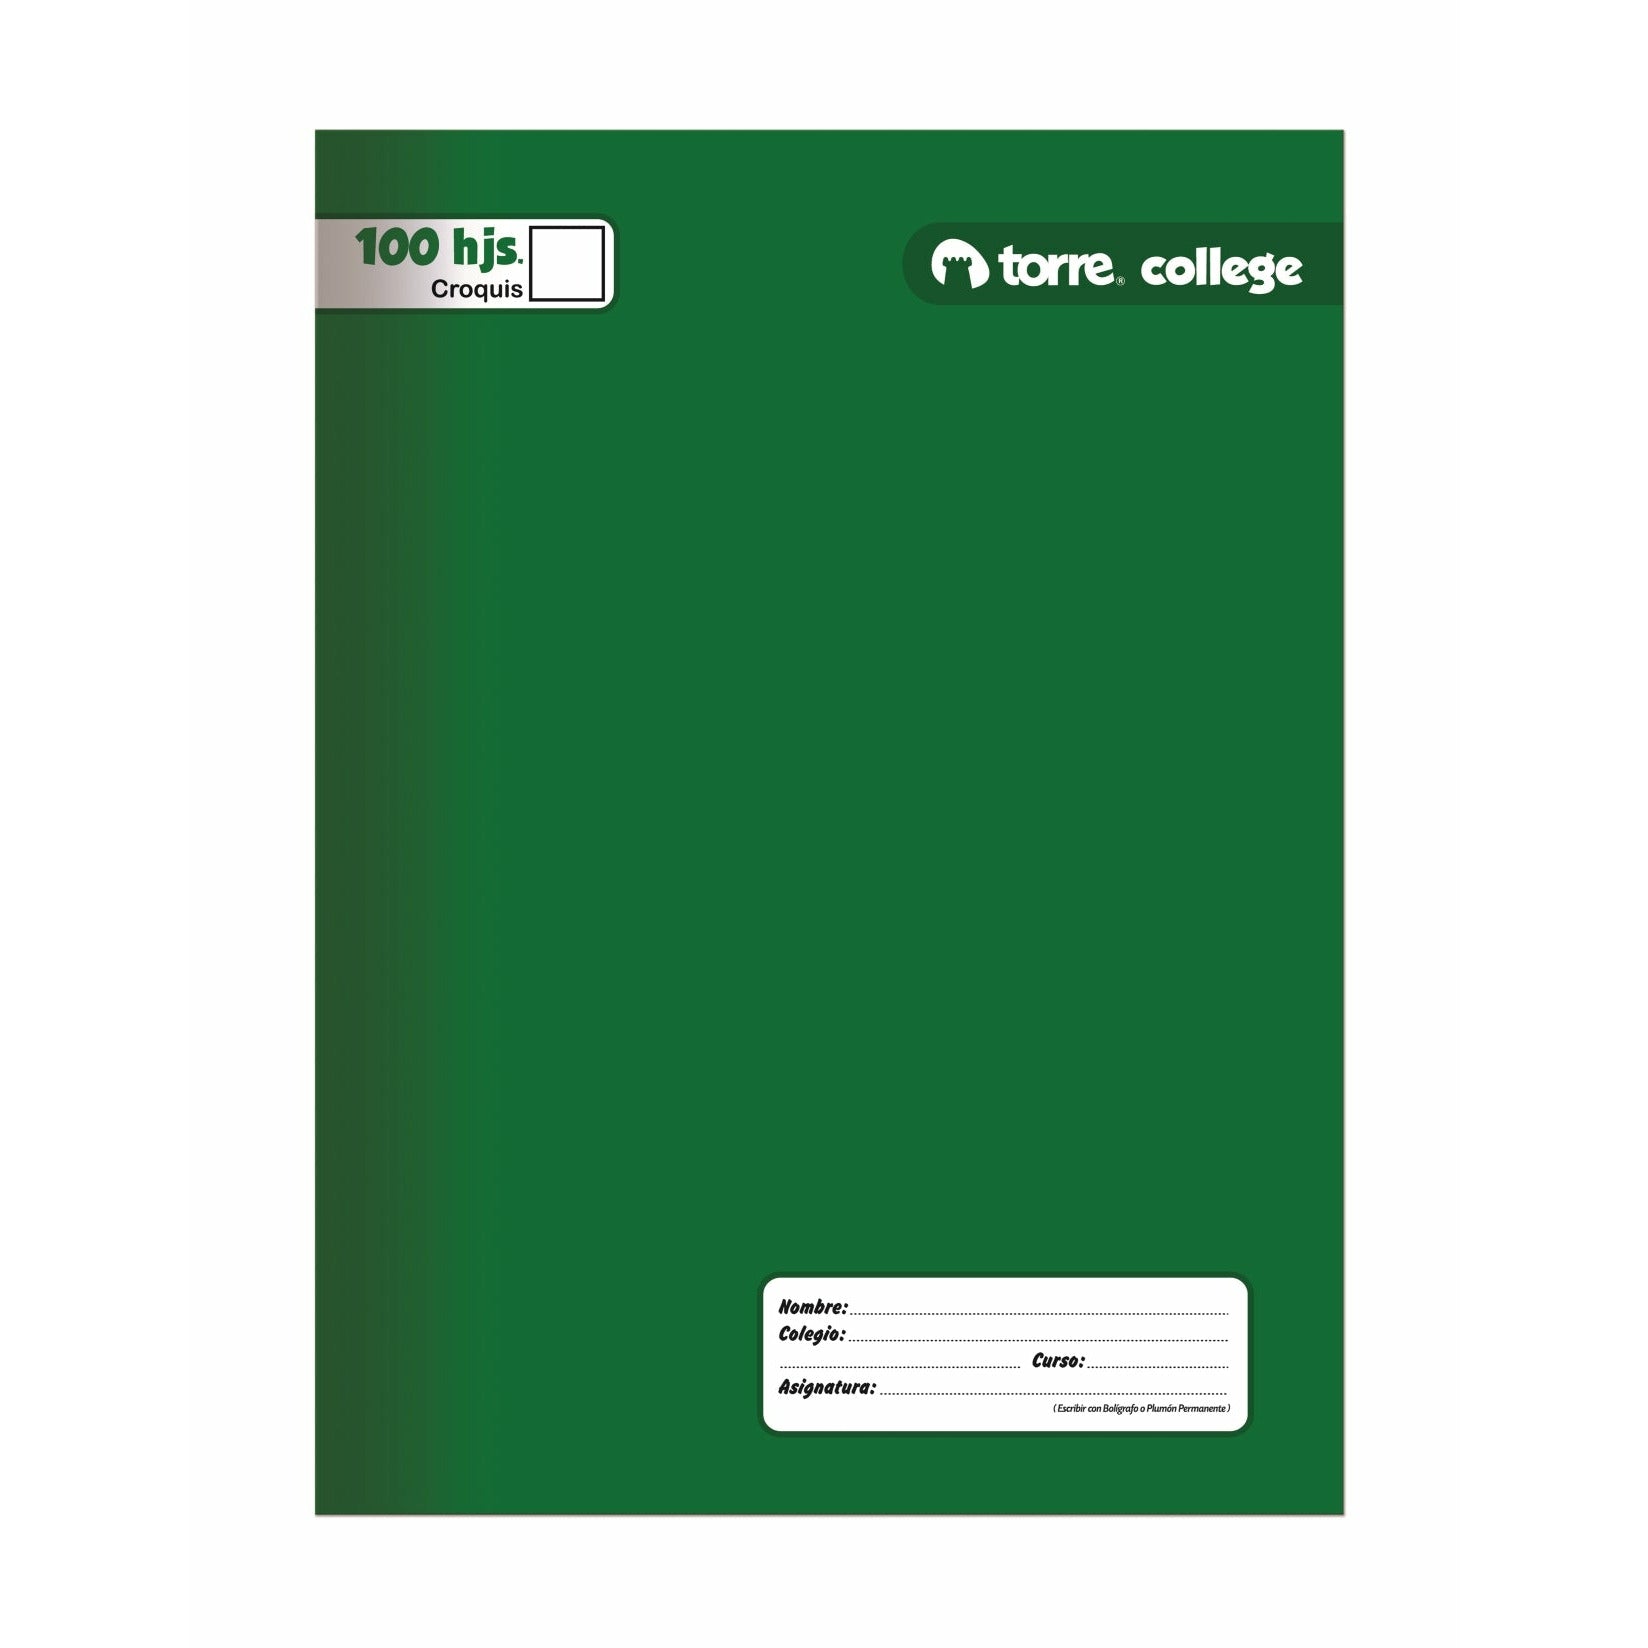 Cuaderno college torre croquis 100hj unid